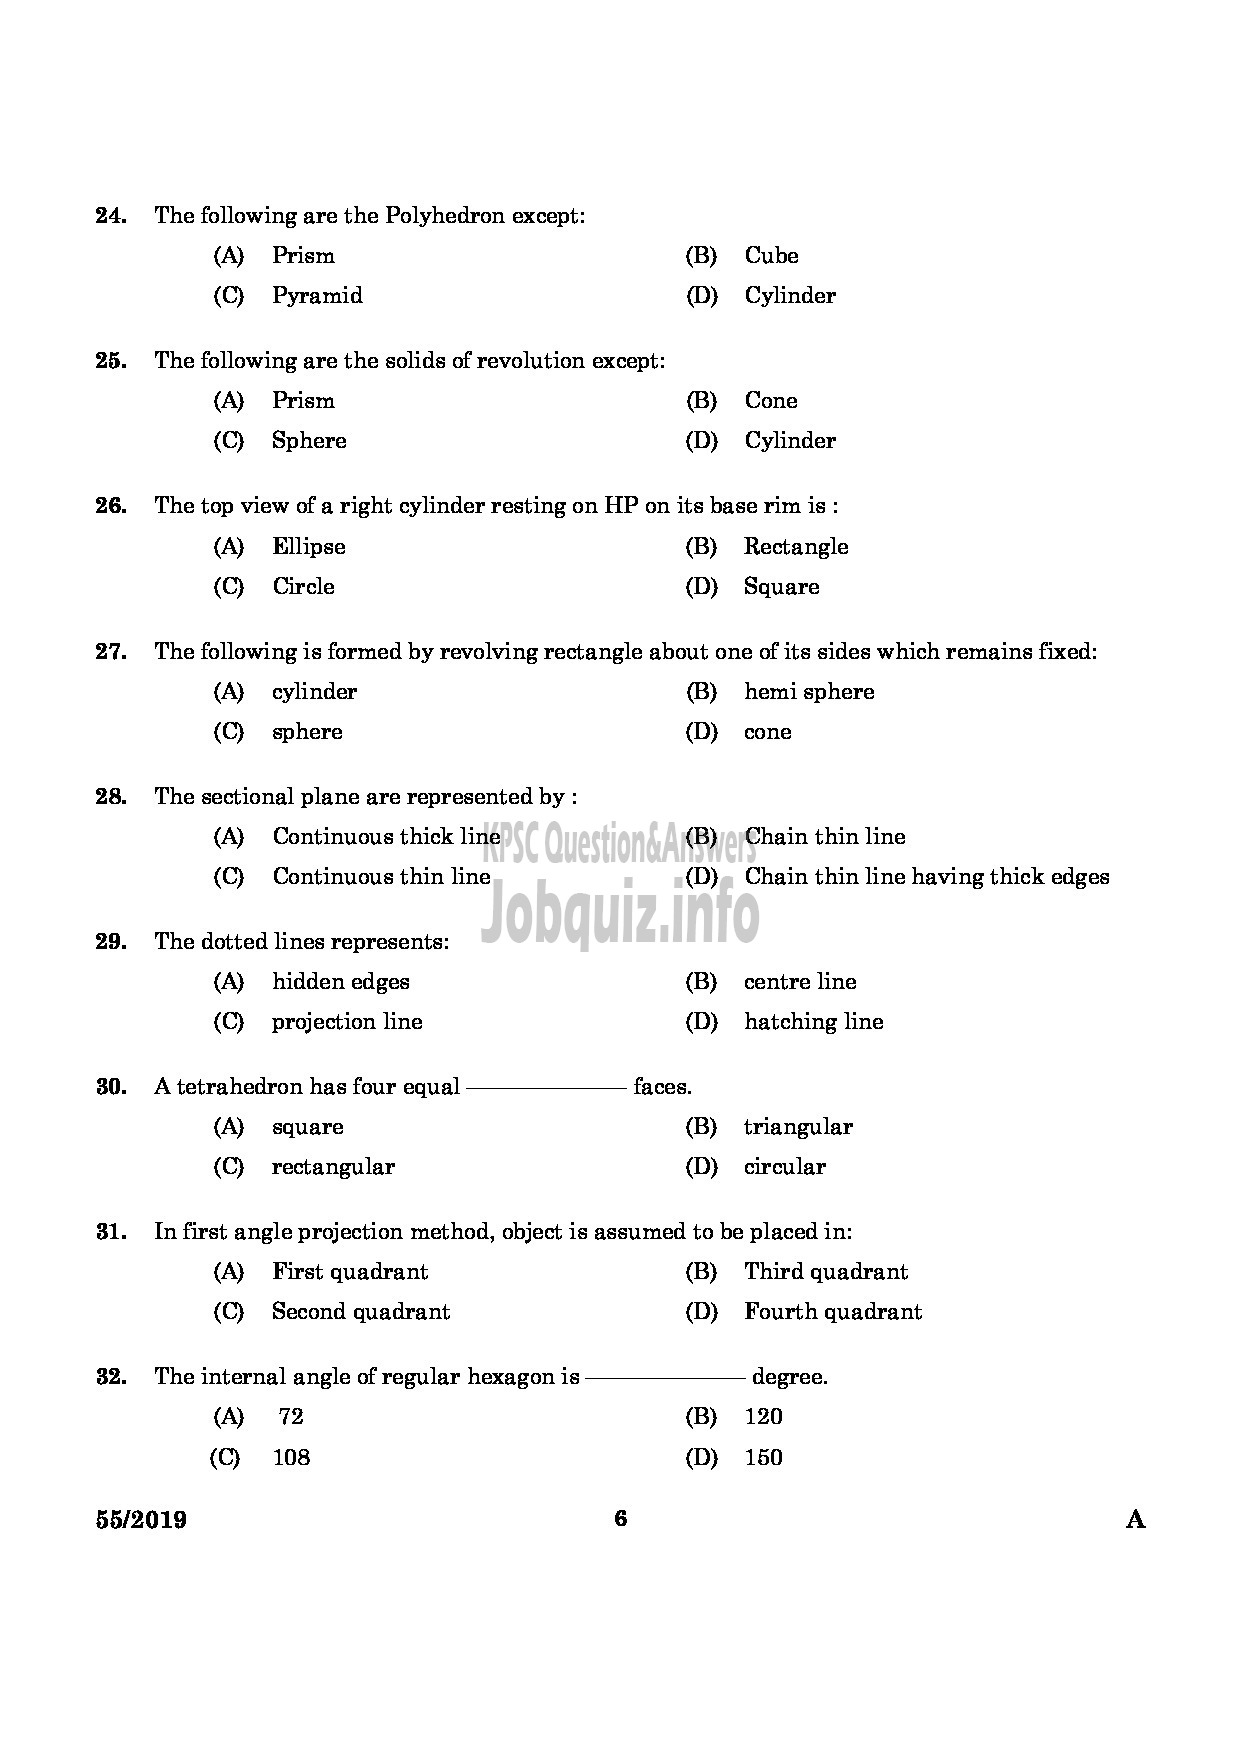 Kerala PSC Question Paper - Overseer / Draftsman (Mechanical) Gr II (Special Recruitment From Among SC/ST) English -4